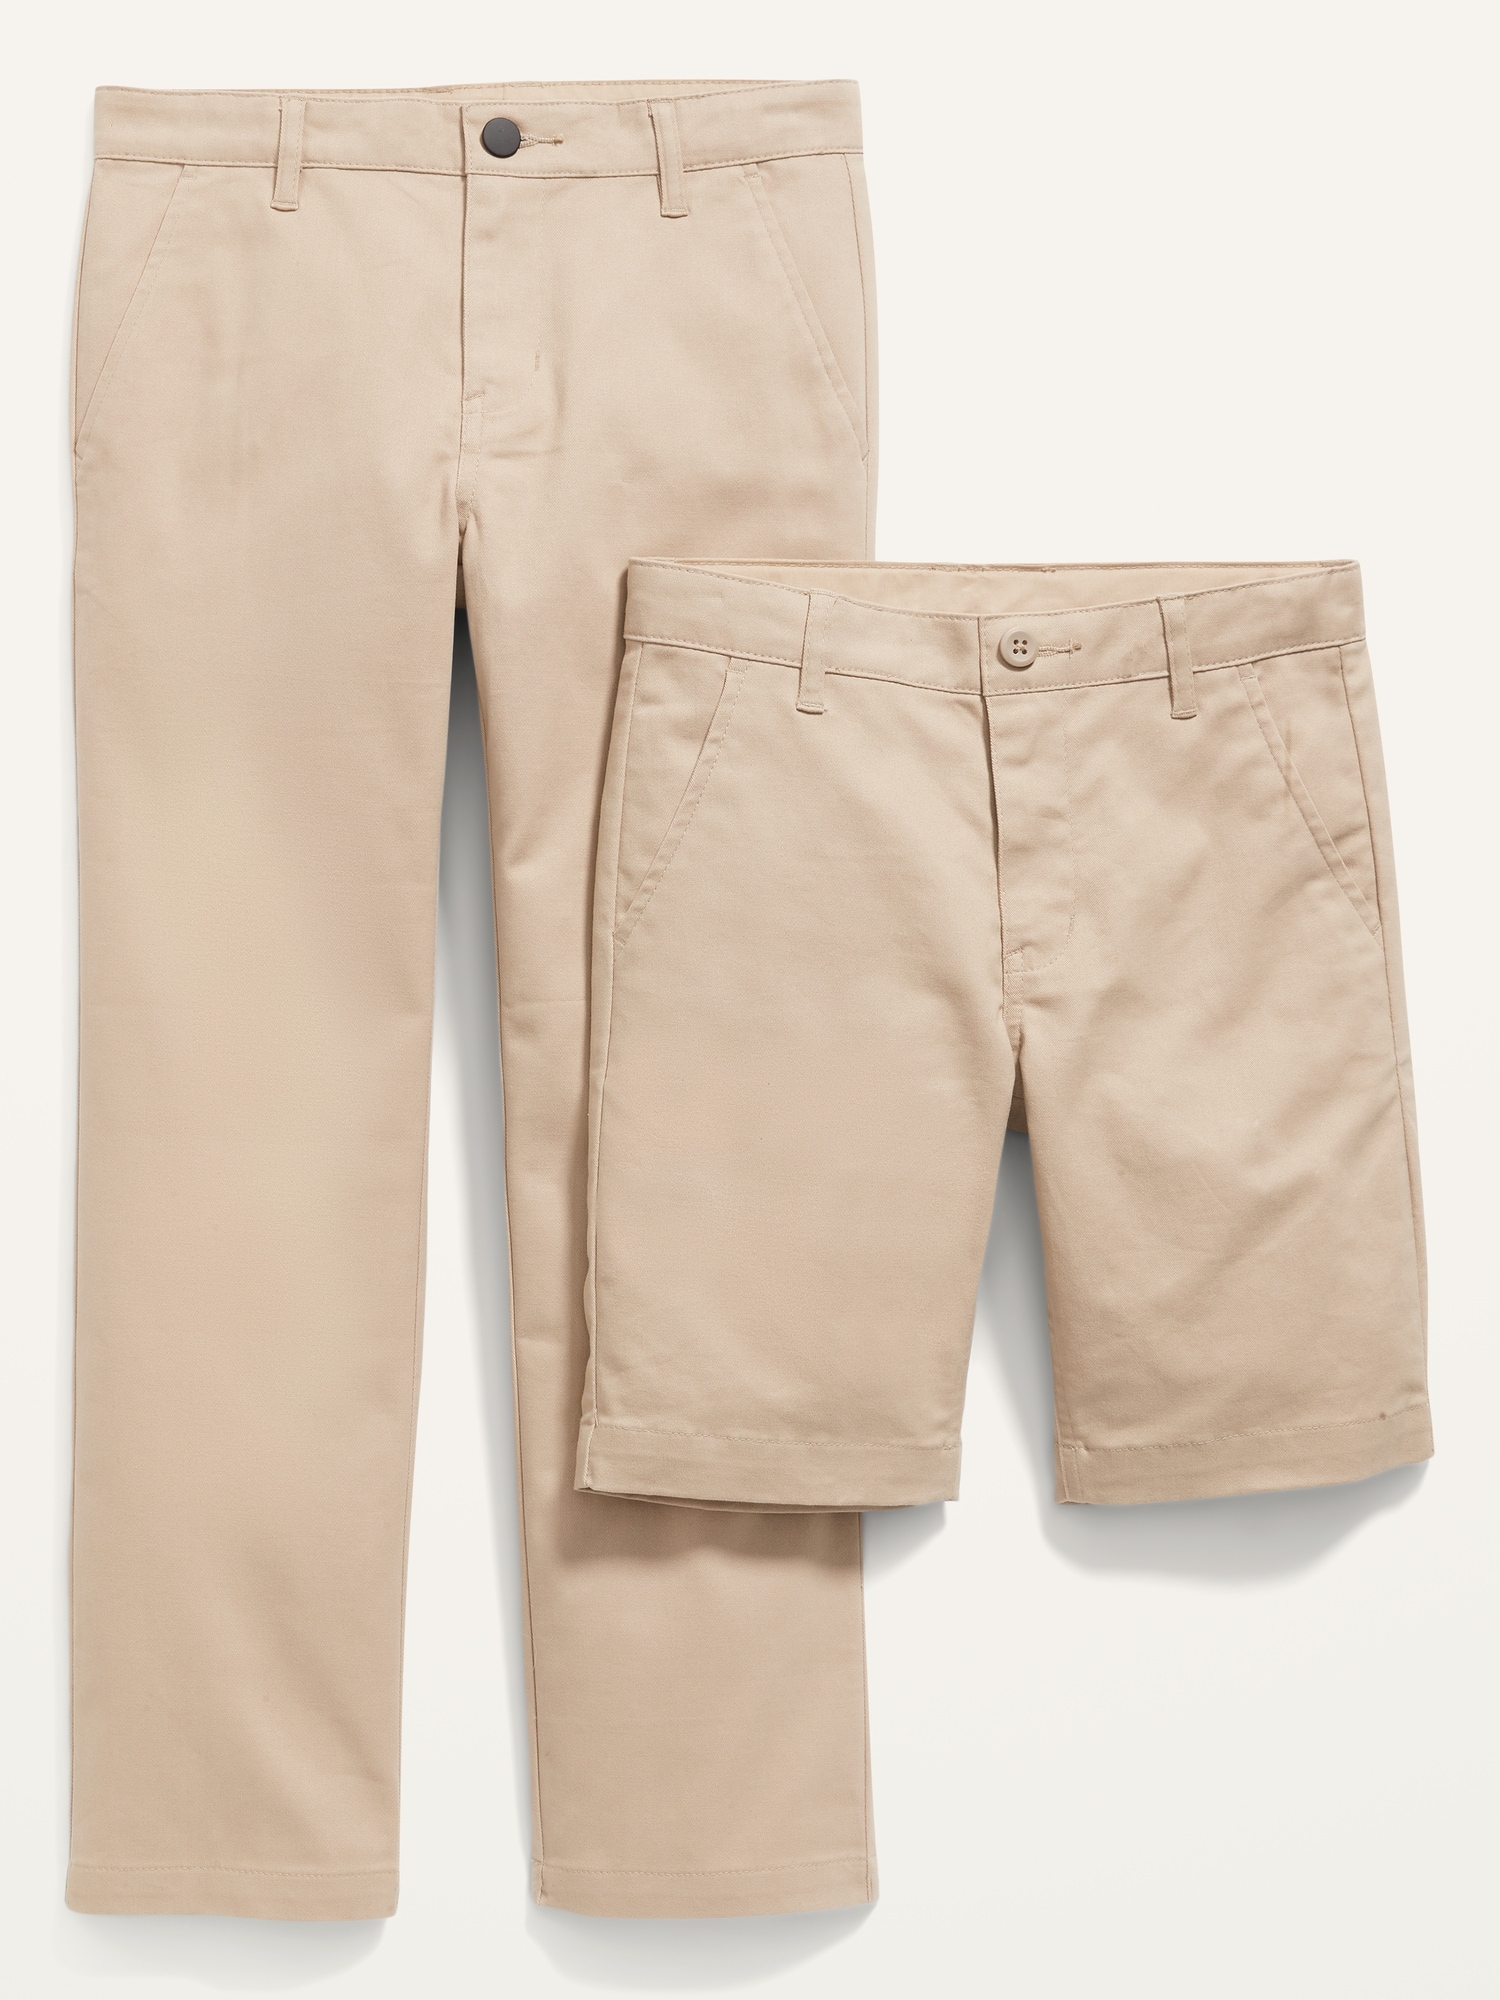 Straight Uniform Pants & Shorts (At Knee) 2-Pack for Boys